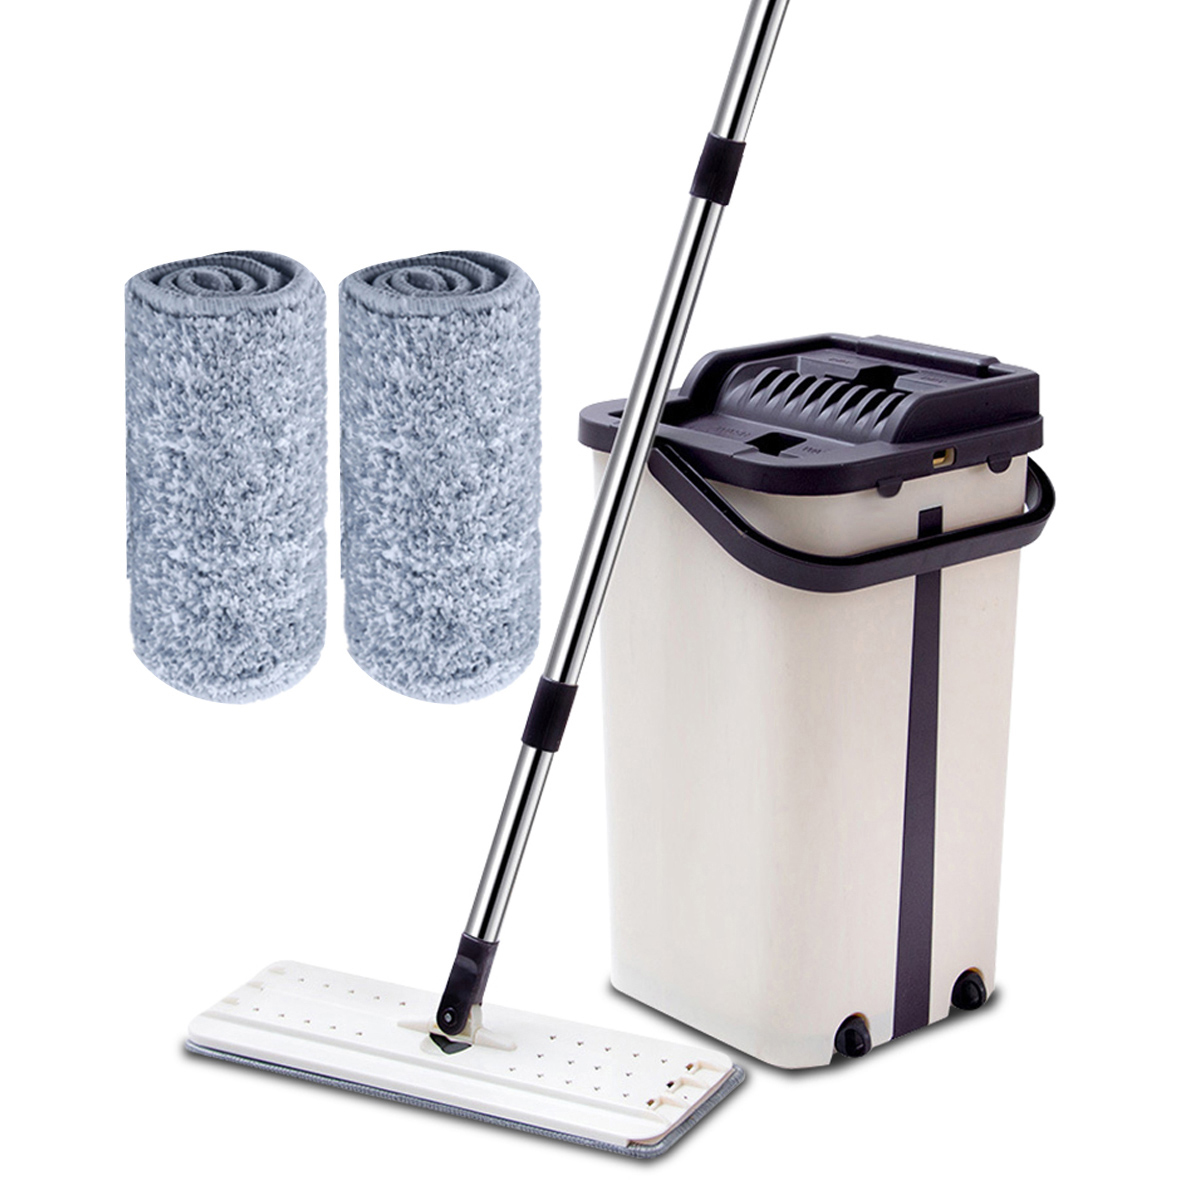 

Stainless Steel Flat Squeeze Mop With Bucket Floor Dust Cleaning Microfiber Mops